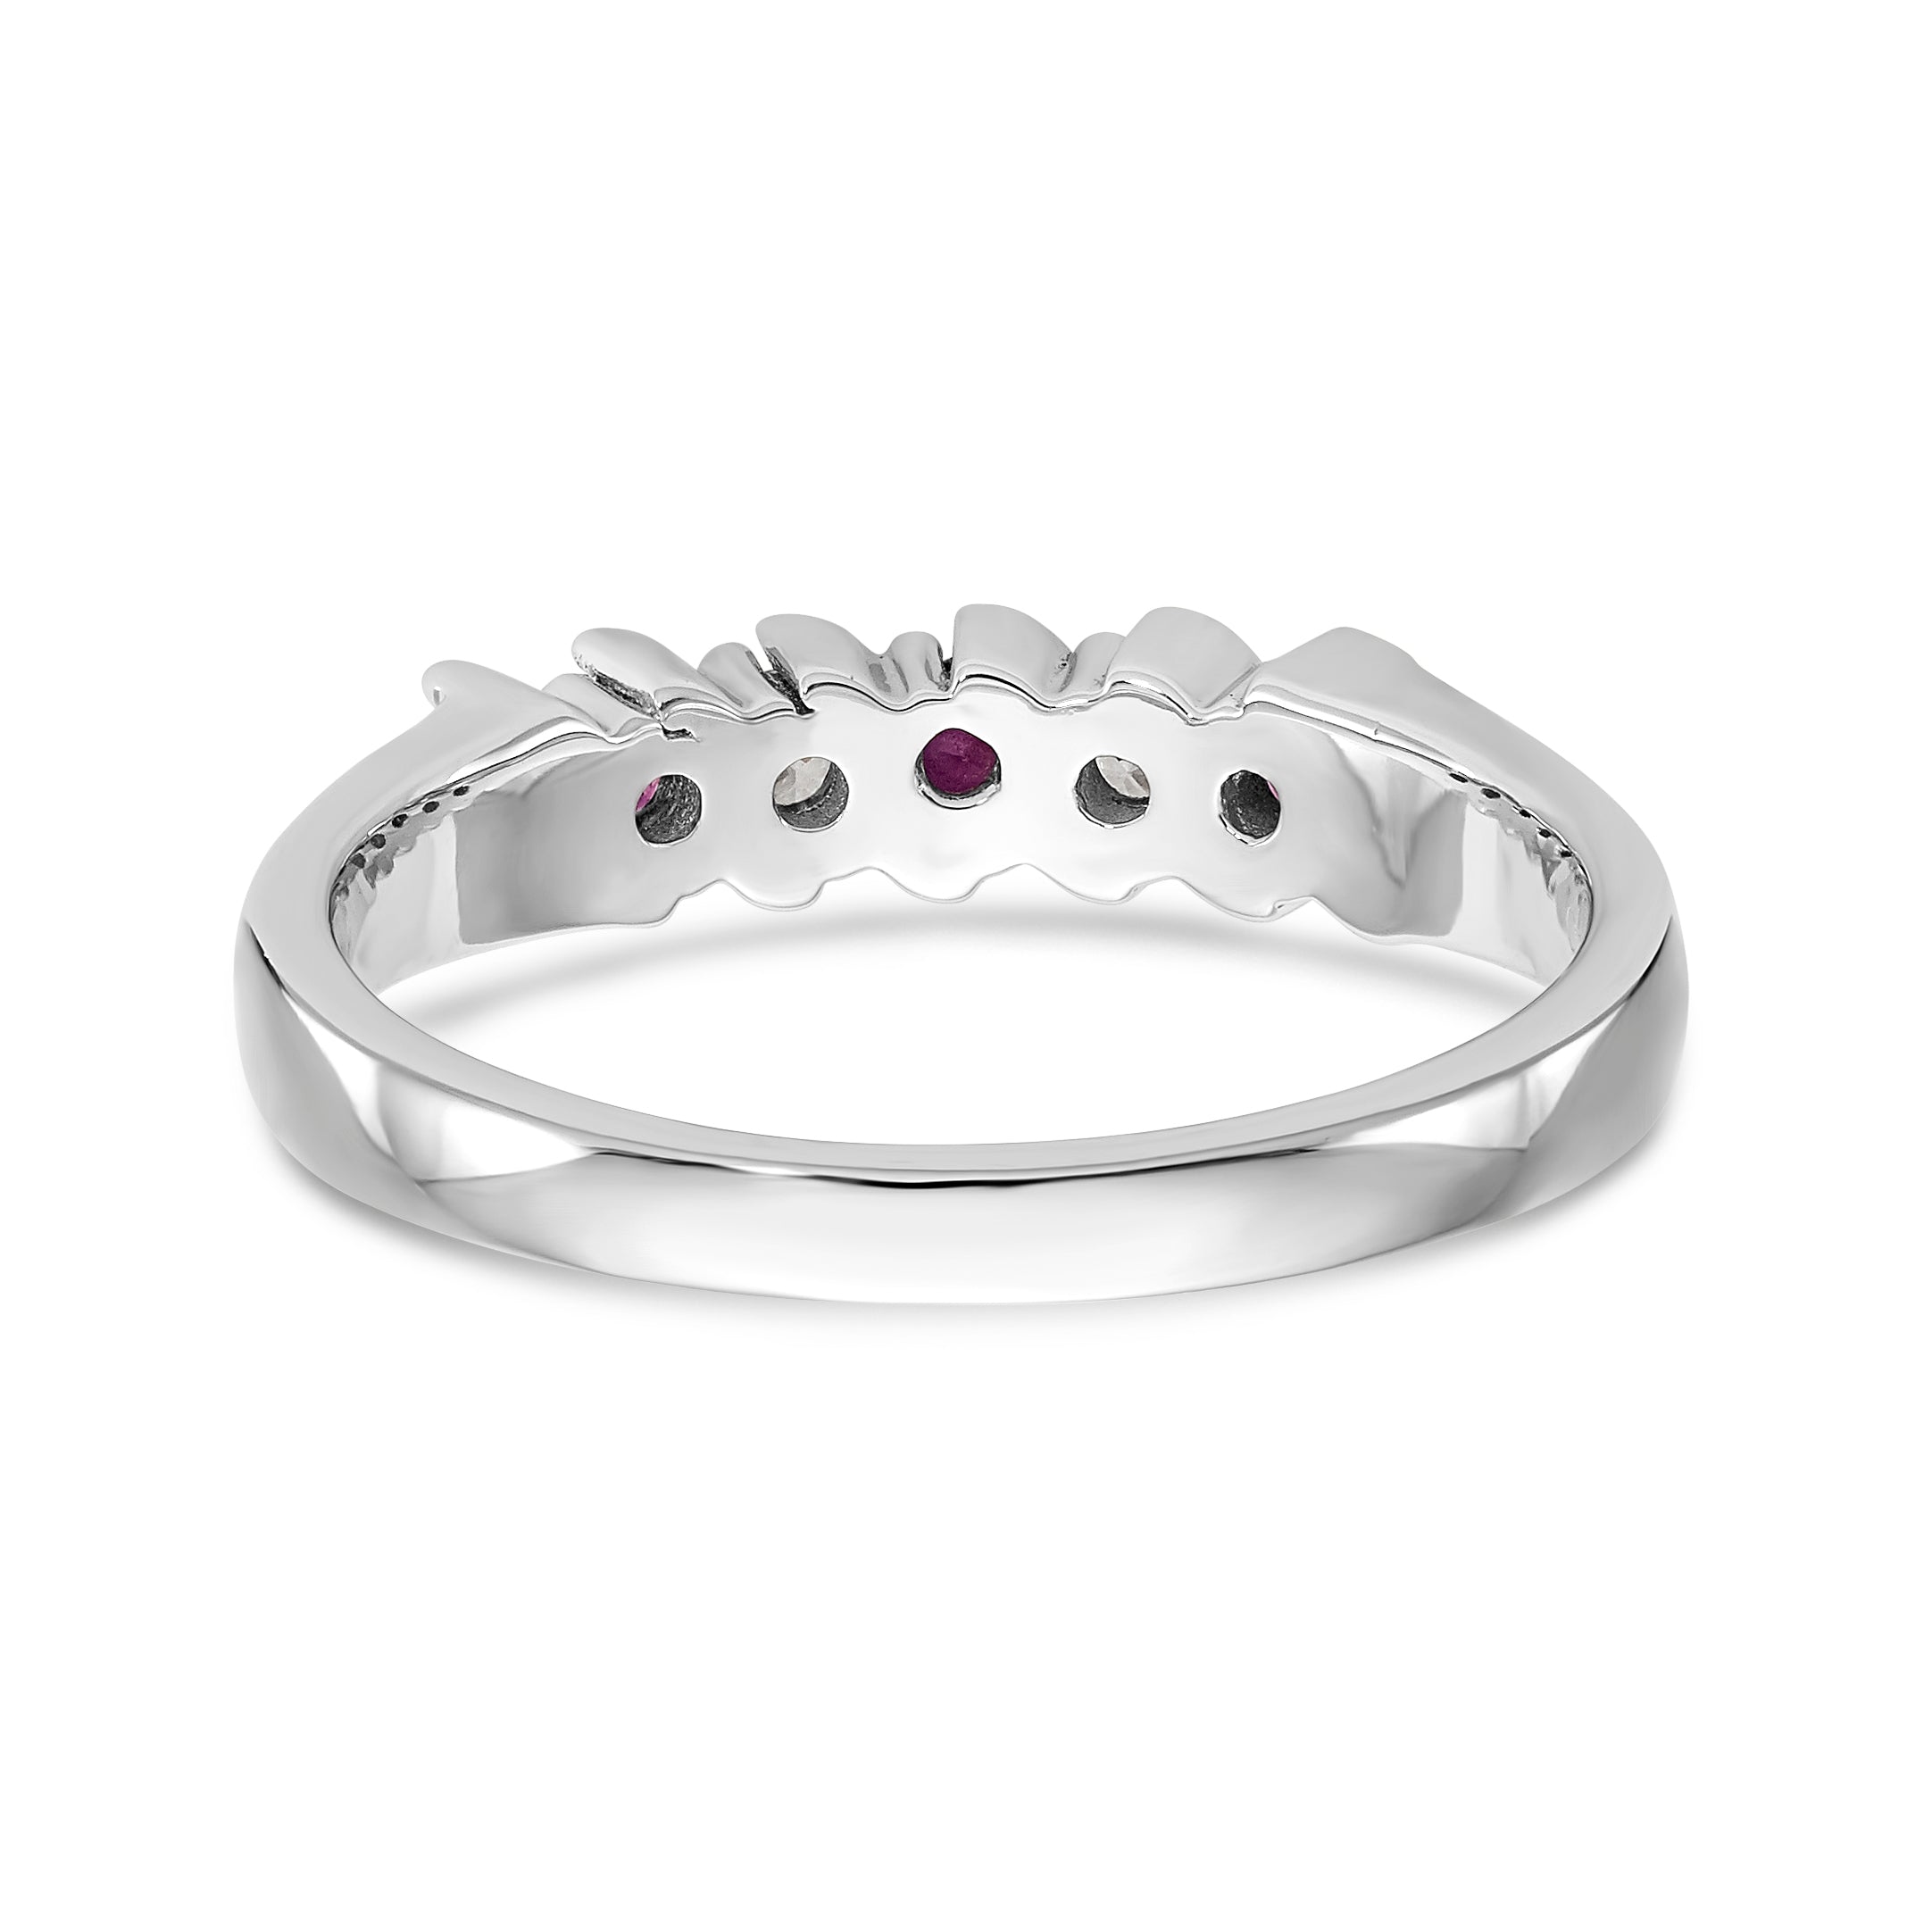 14K White Gold 1/10 carat Diamond and Ruby Complete Band